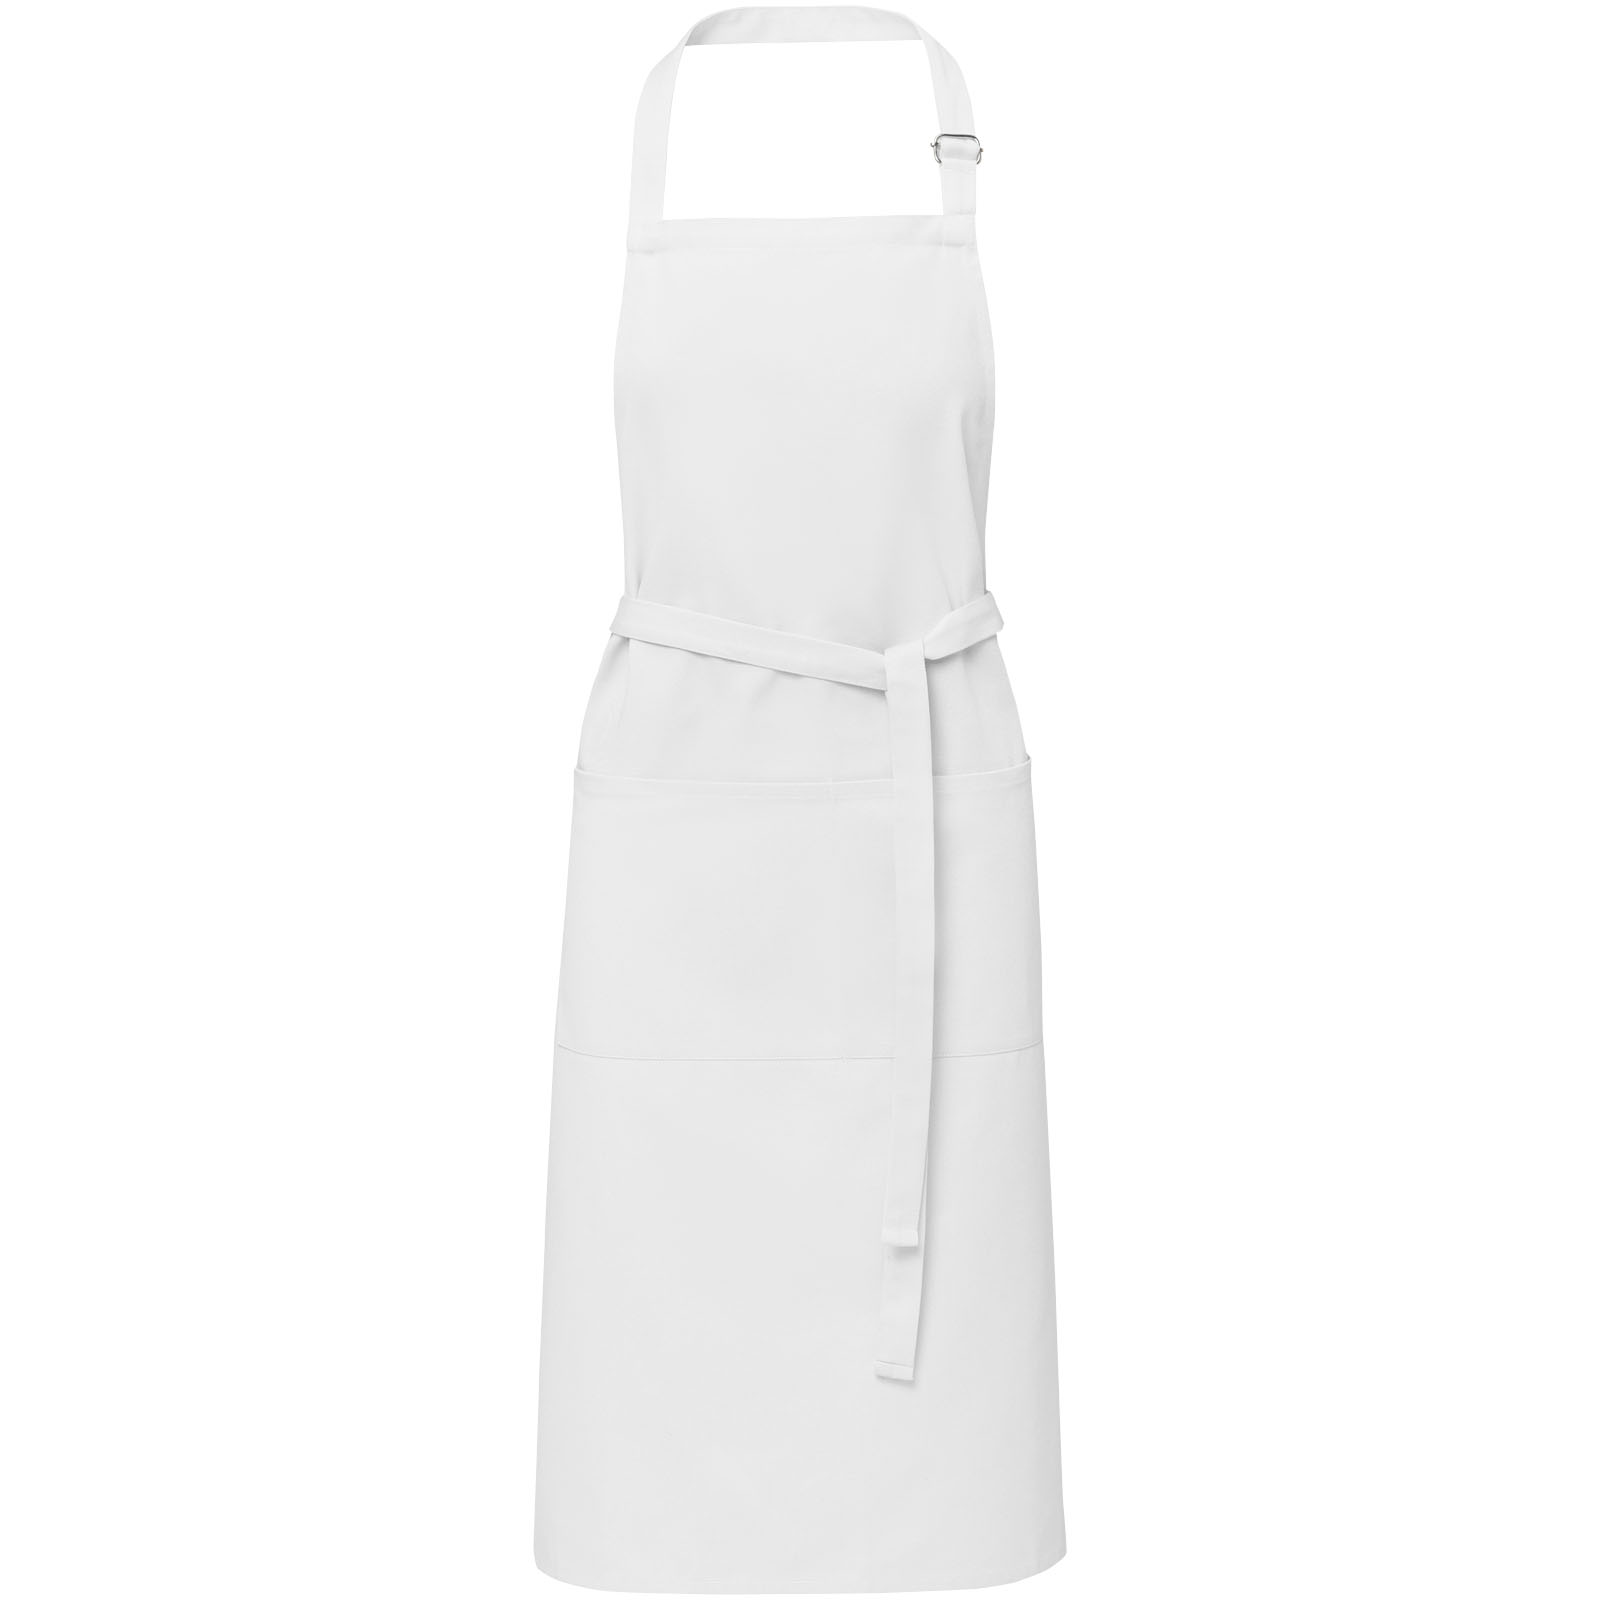 Aprons - Andrea 240 g/m² apron with adjustable neck strap